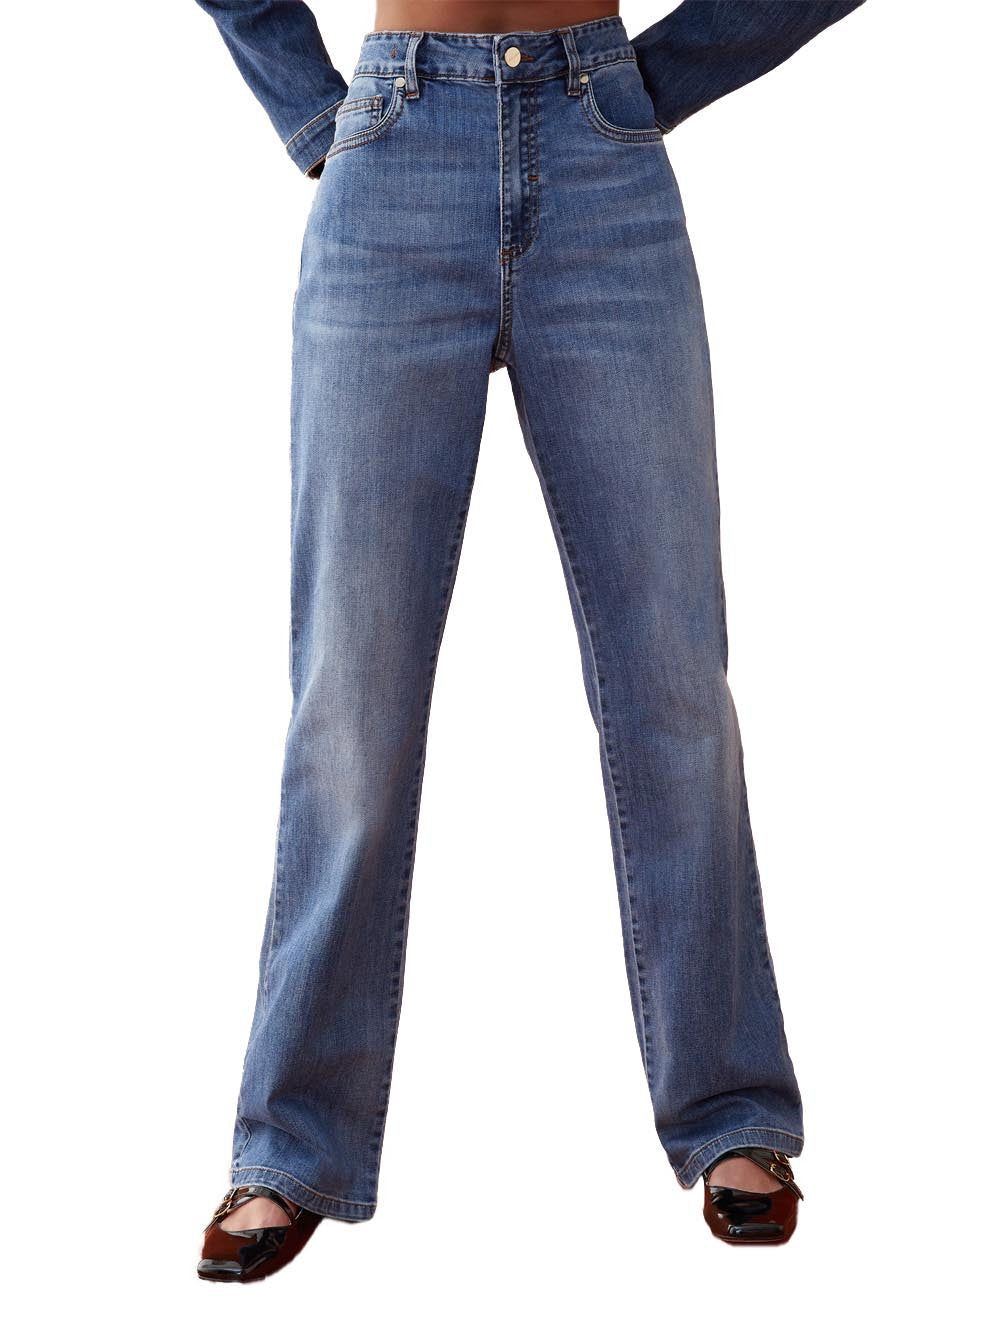 iBlues Jeans Donna Penelope Medio